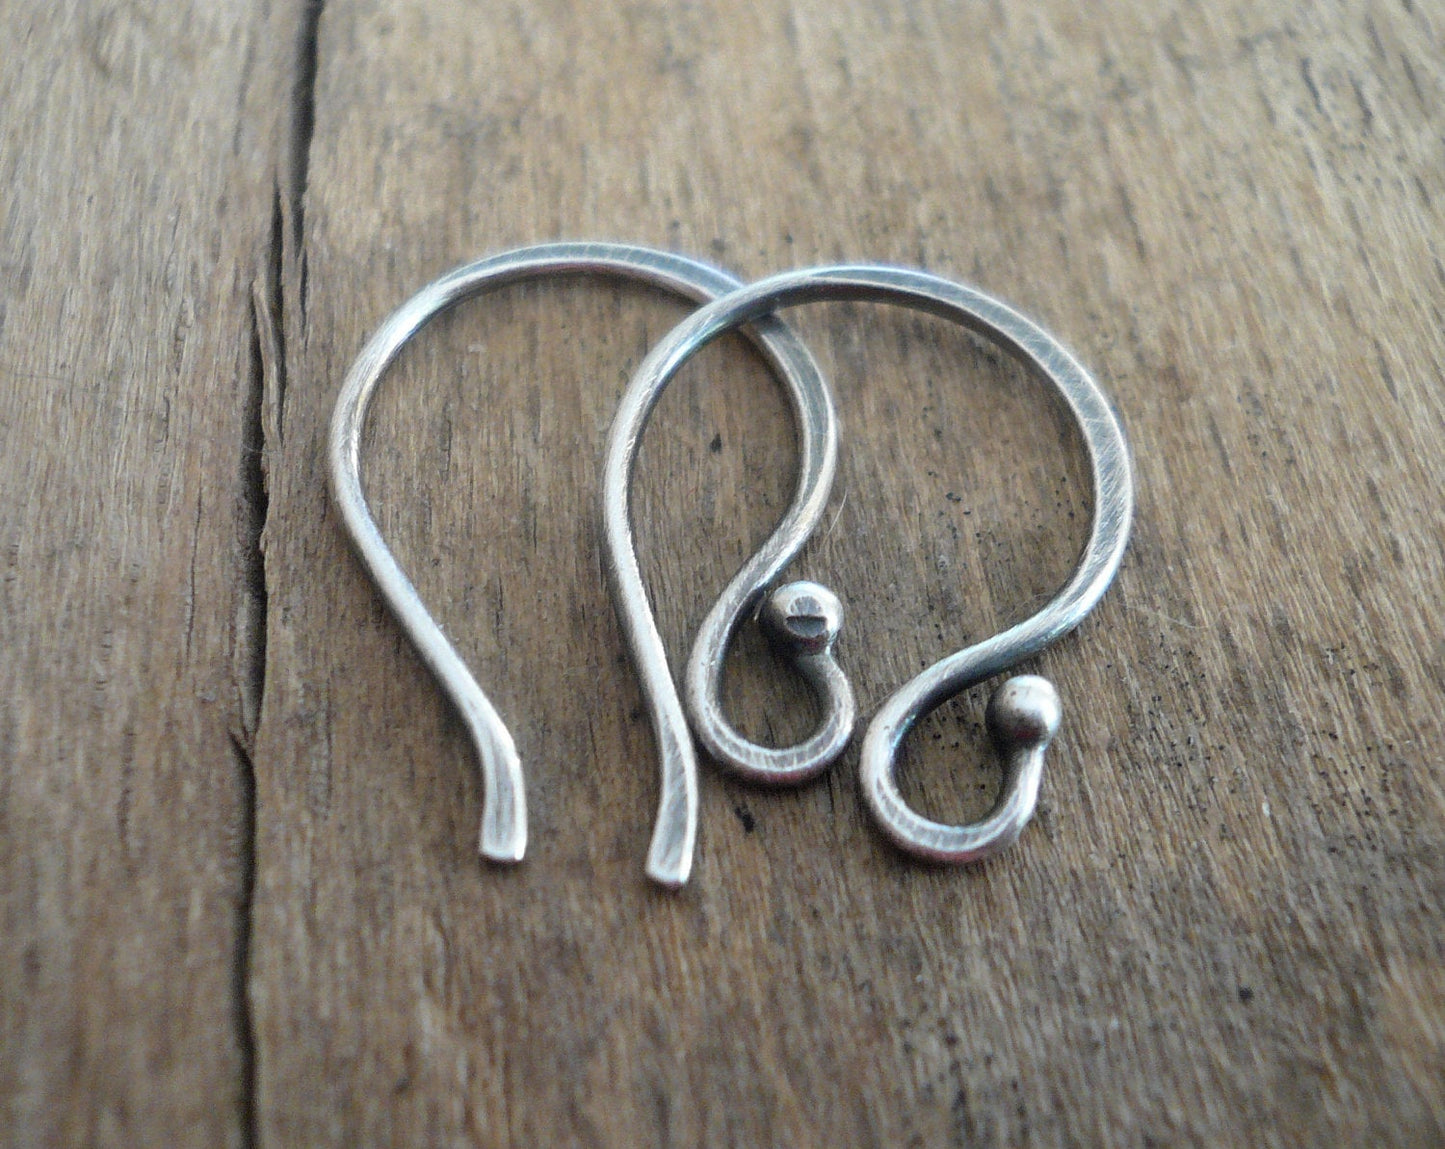 Ball End Twinkle Fine Silver Earwires - Handmade. Handforged. Oxidized & polished. Made to Order